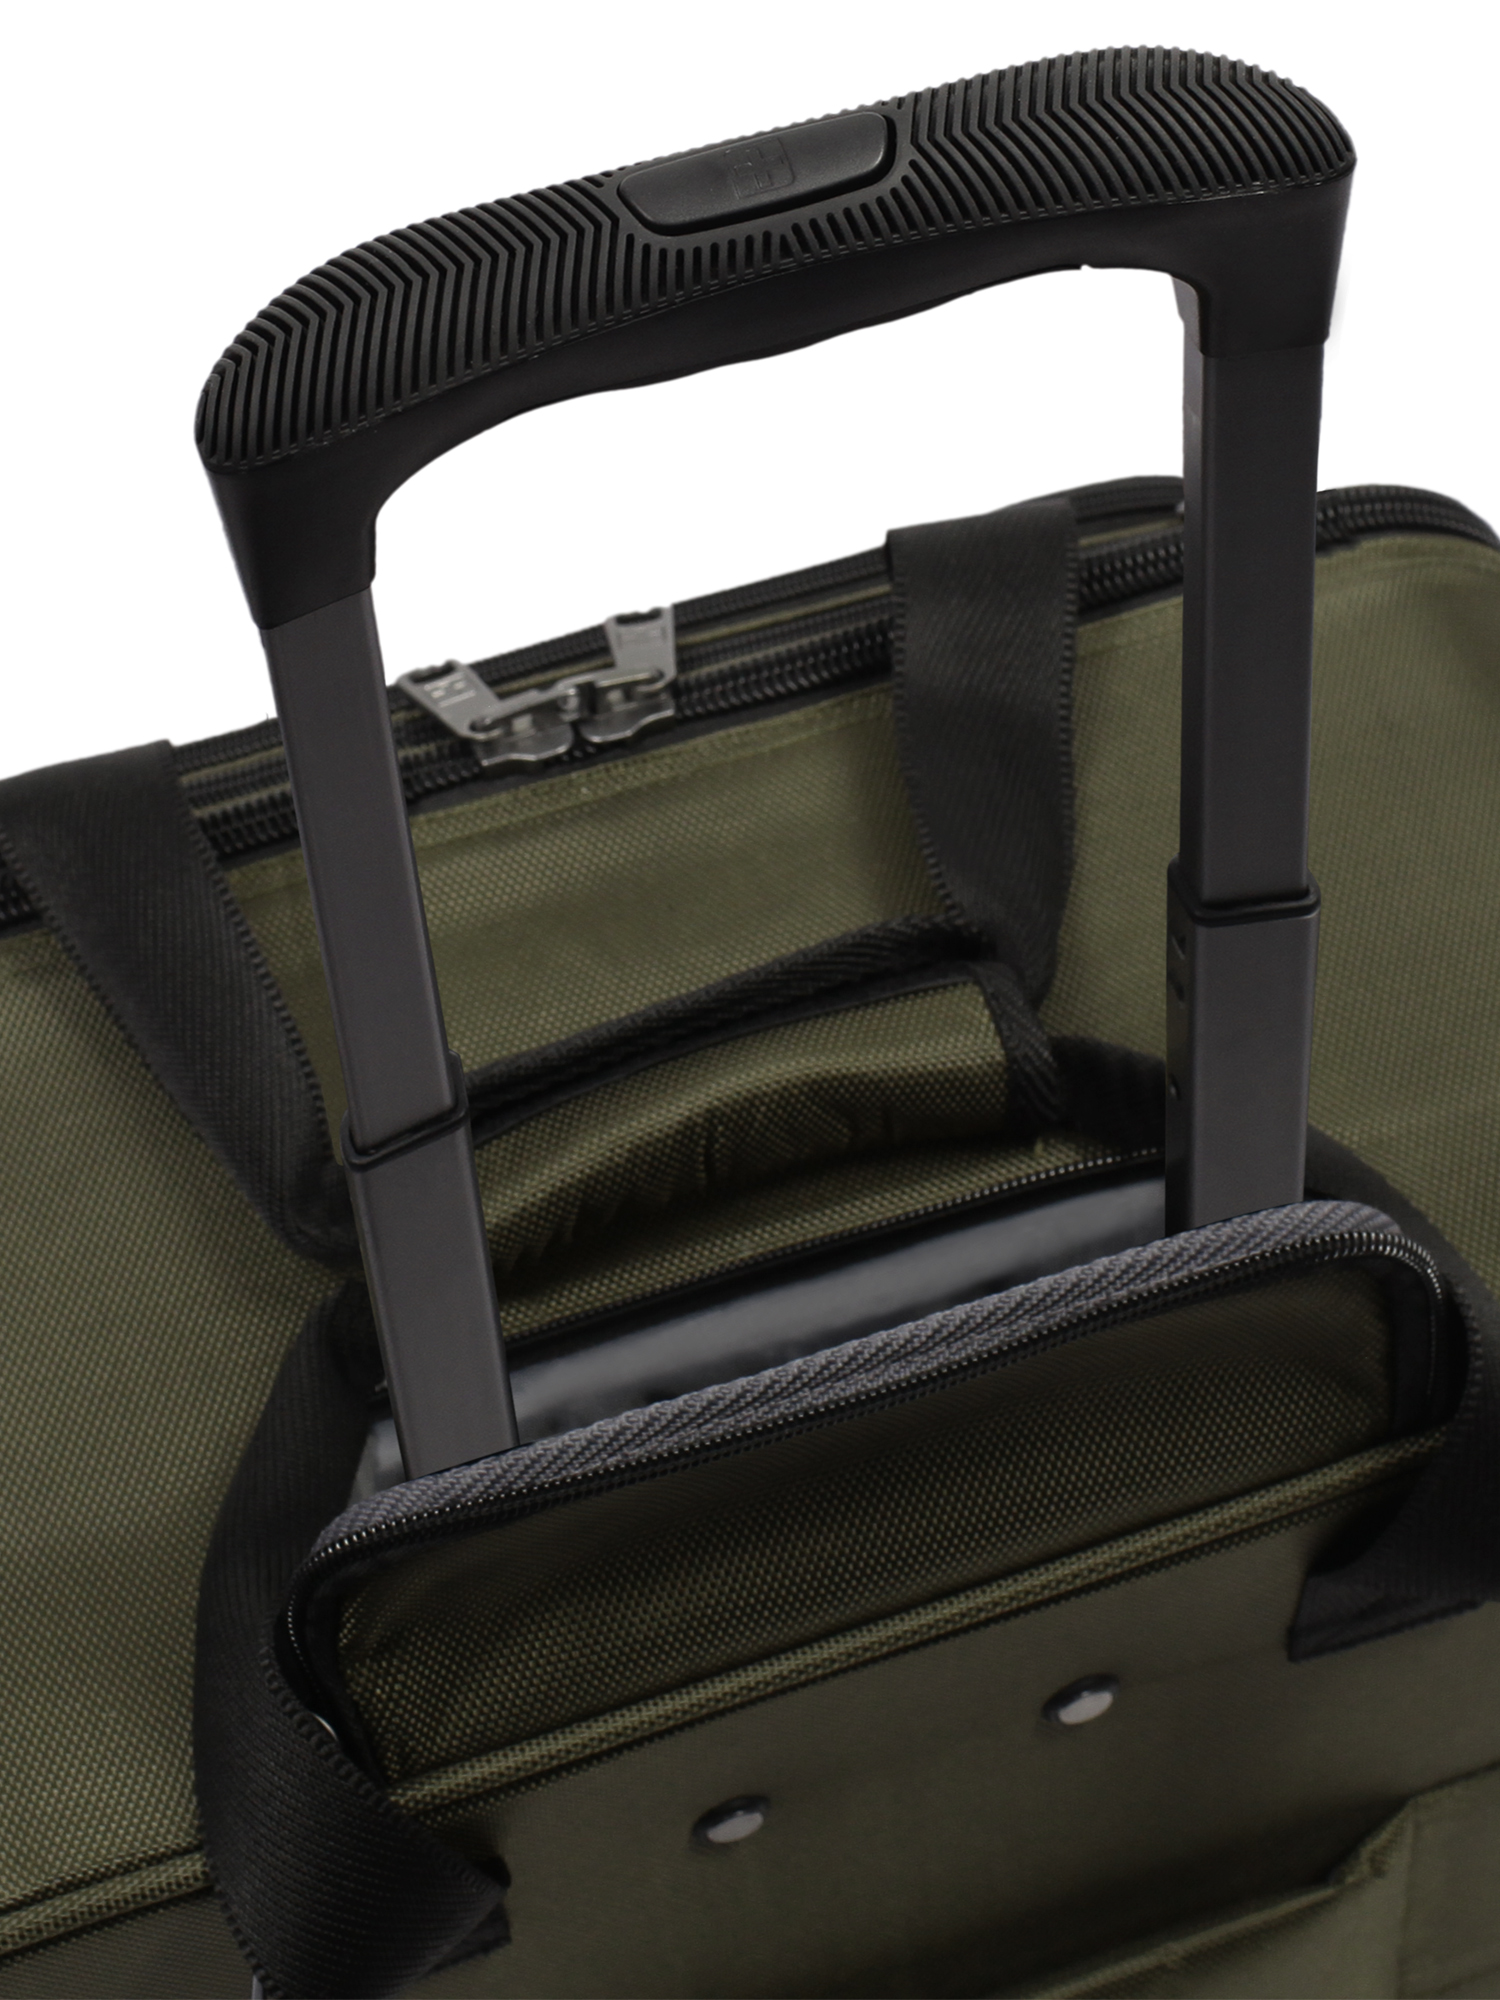 SwissTech Urban Trek 16.5" Under-seater Carry On Luggage, Olive (Walmart Exclusive) - image 3 of 12